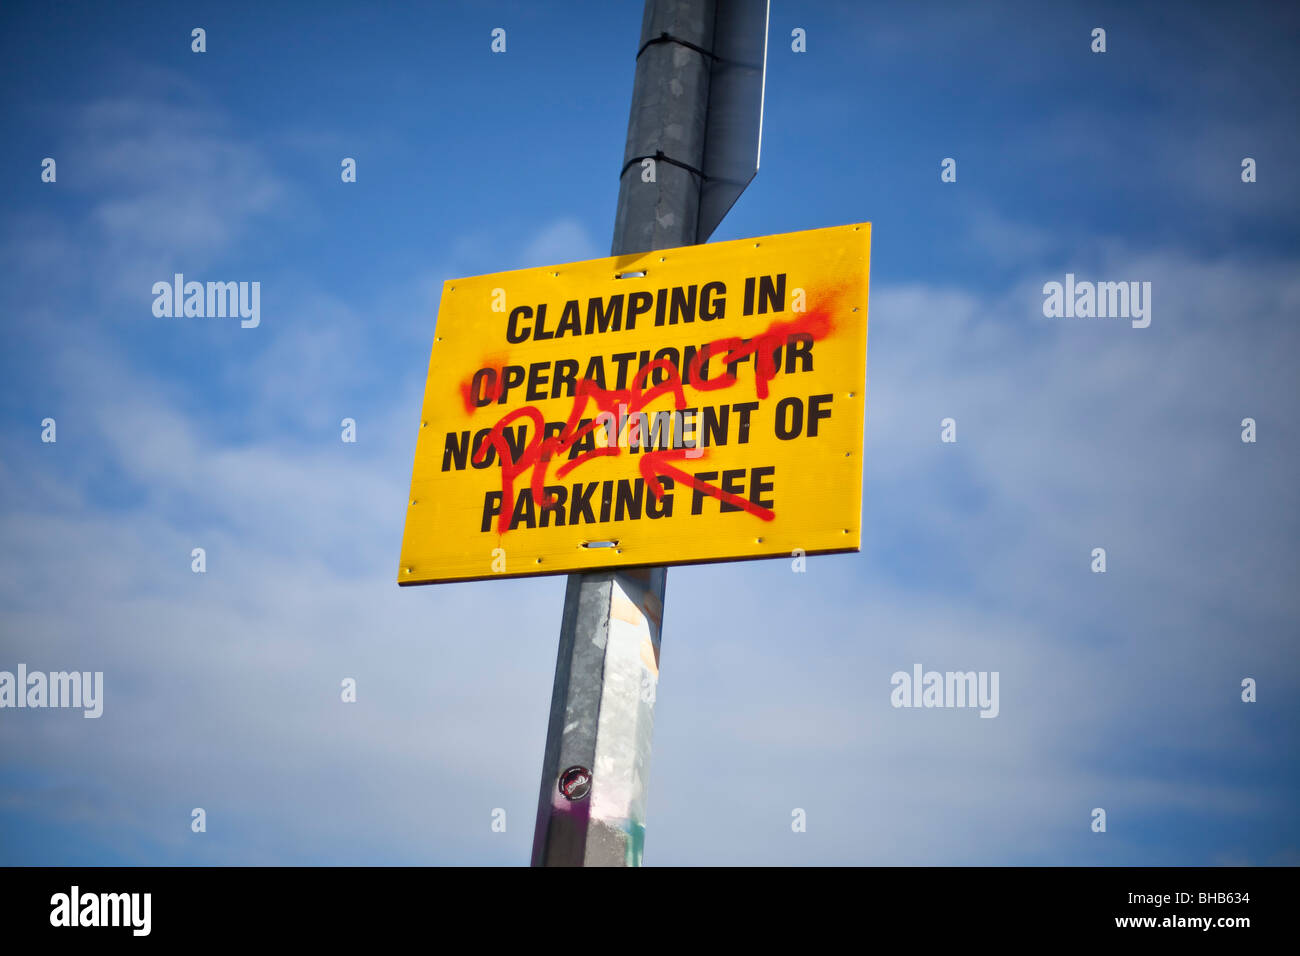 Clamping in operation sight with graffiti sprayed on it against a blue sky Stock Photo